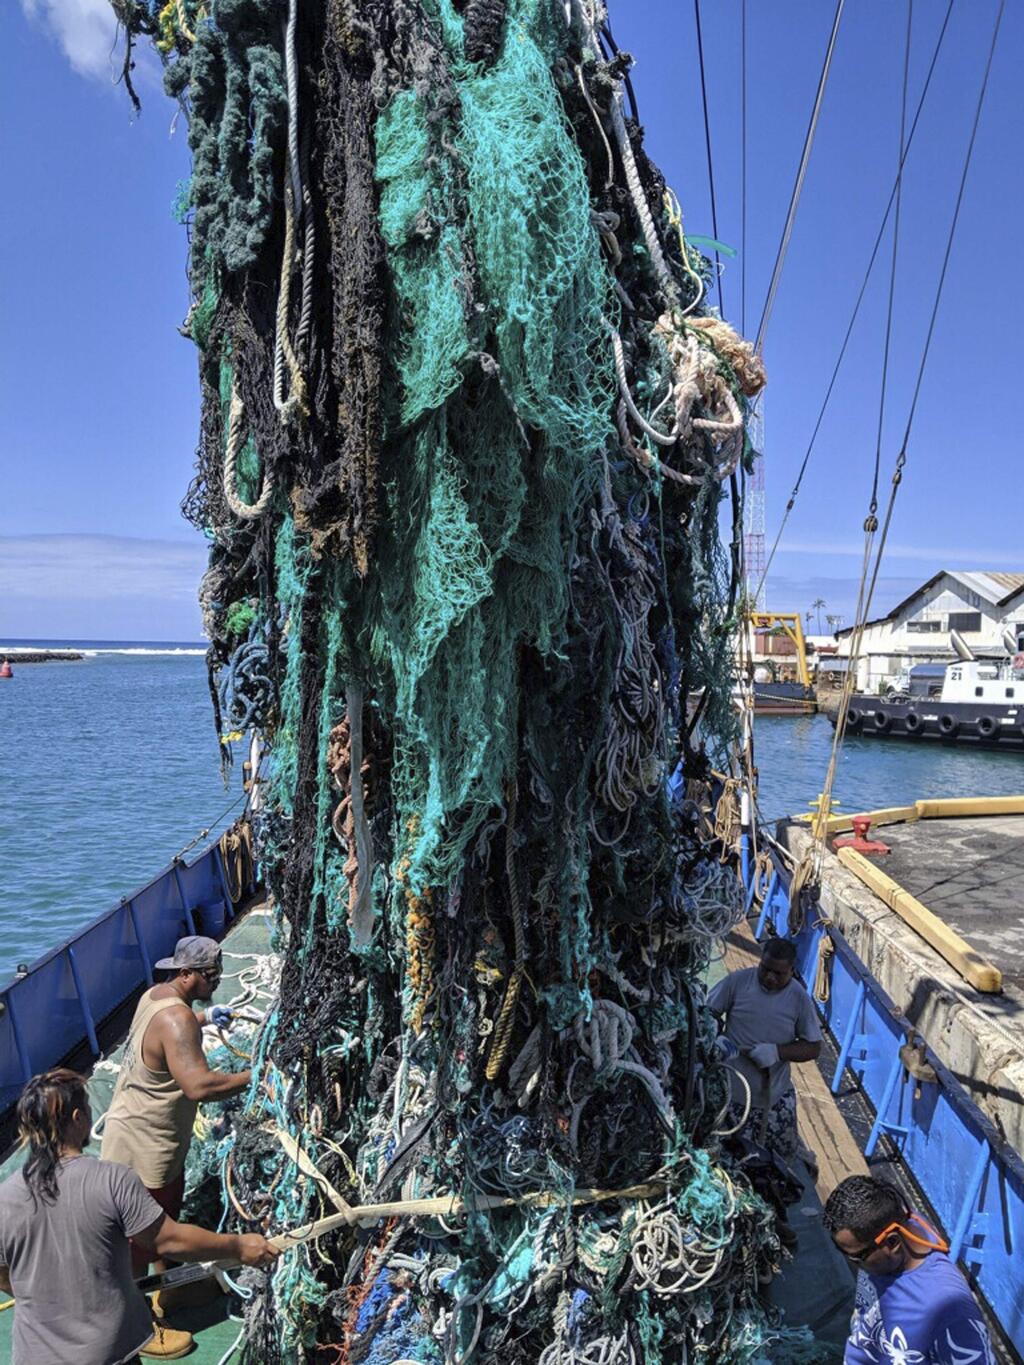 This photo taken June 18, 2019, provided by the Ocean Voyages Institute, shows a large net that was removed from the ocean during the Pacific gyre cleanup in Honolulu. Mariners on a sailing vessel hundreds of miles from the Hawaiian coast picked up more than 40 tons of abandoned fishing nets in an effort to clean a garbage patch in the Pacific Ocean, where the nets can entangle whales, turtles and fish and damage coral reefs. The crew of volunteers with the California-based nonprofit Ocean Voyages Institute fished out the derelict nets from a marine gyre between Hawaii and California known as the Great Pacific Garbage Patch during a 25-day expedition, the group's founder, Mary Crowley, announced Friday, June 28, 2019. (Greg Yoder/Ocean Voyages Institute via AP)